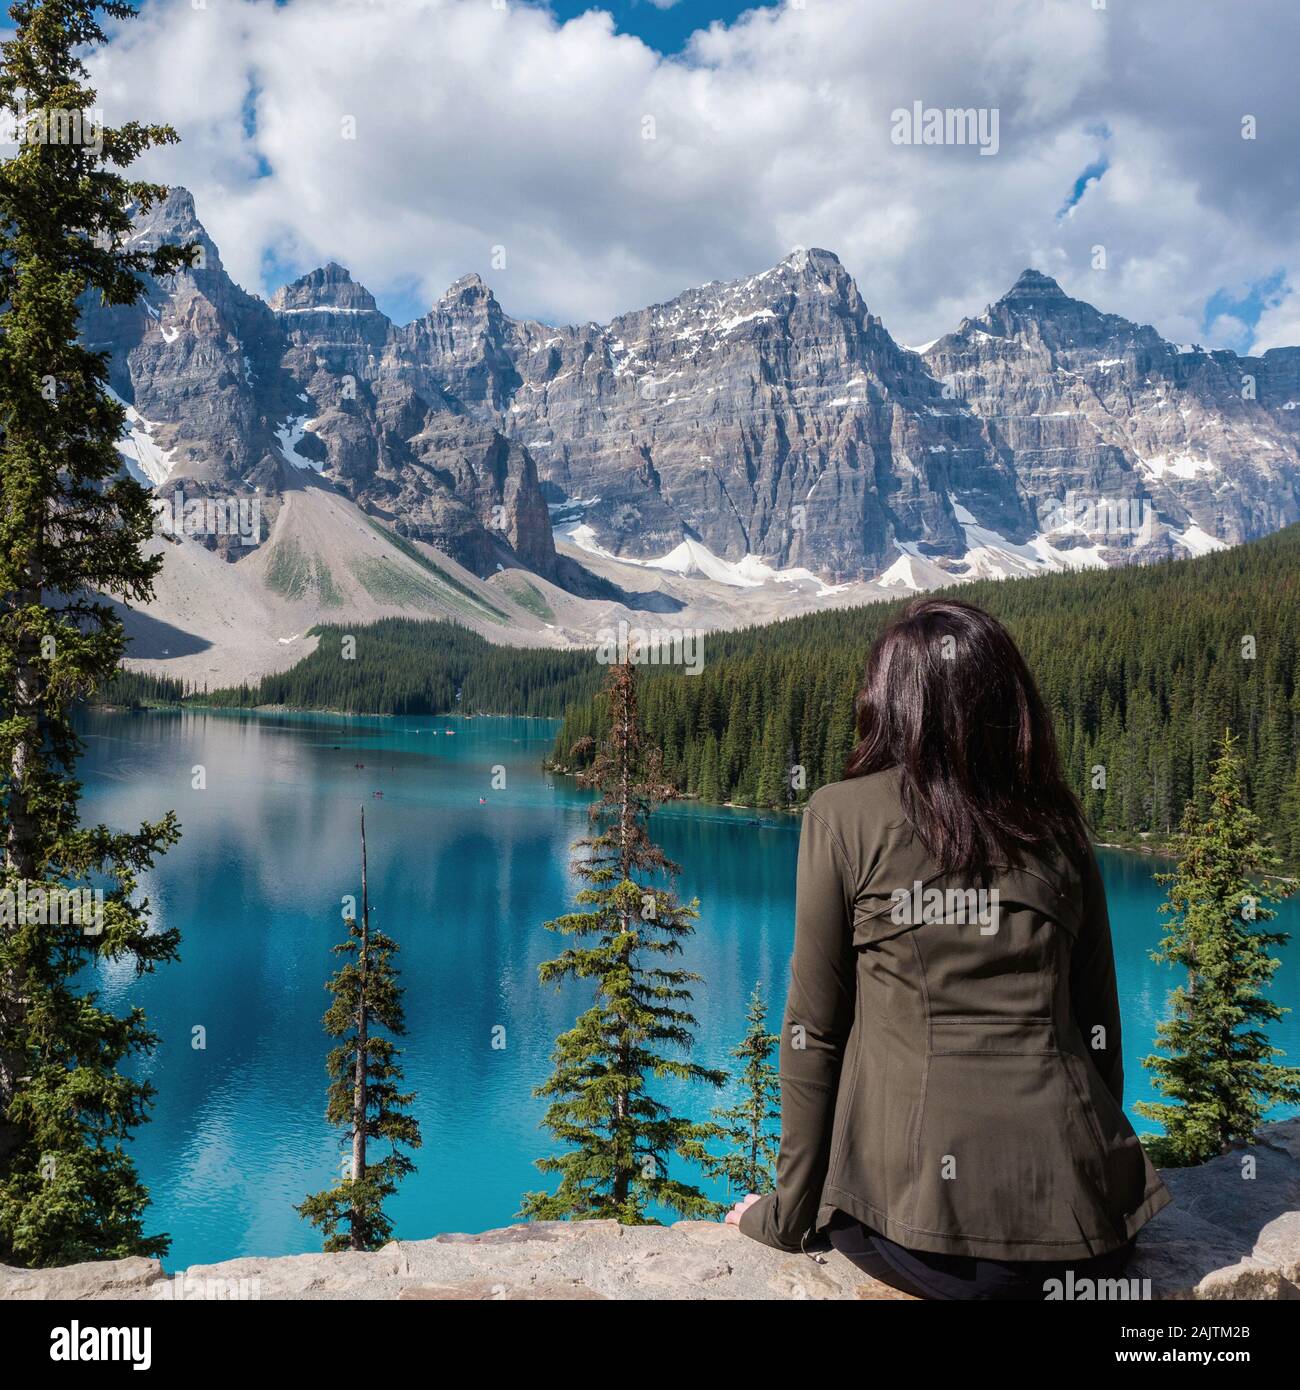 Female tourist looking at the view at Moraine Lake in Banff National Park, Canadian Rockies, Alberta, Canada. Stock Photo